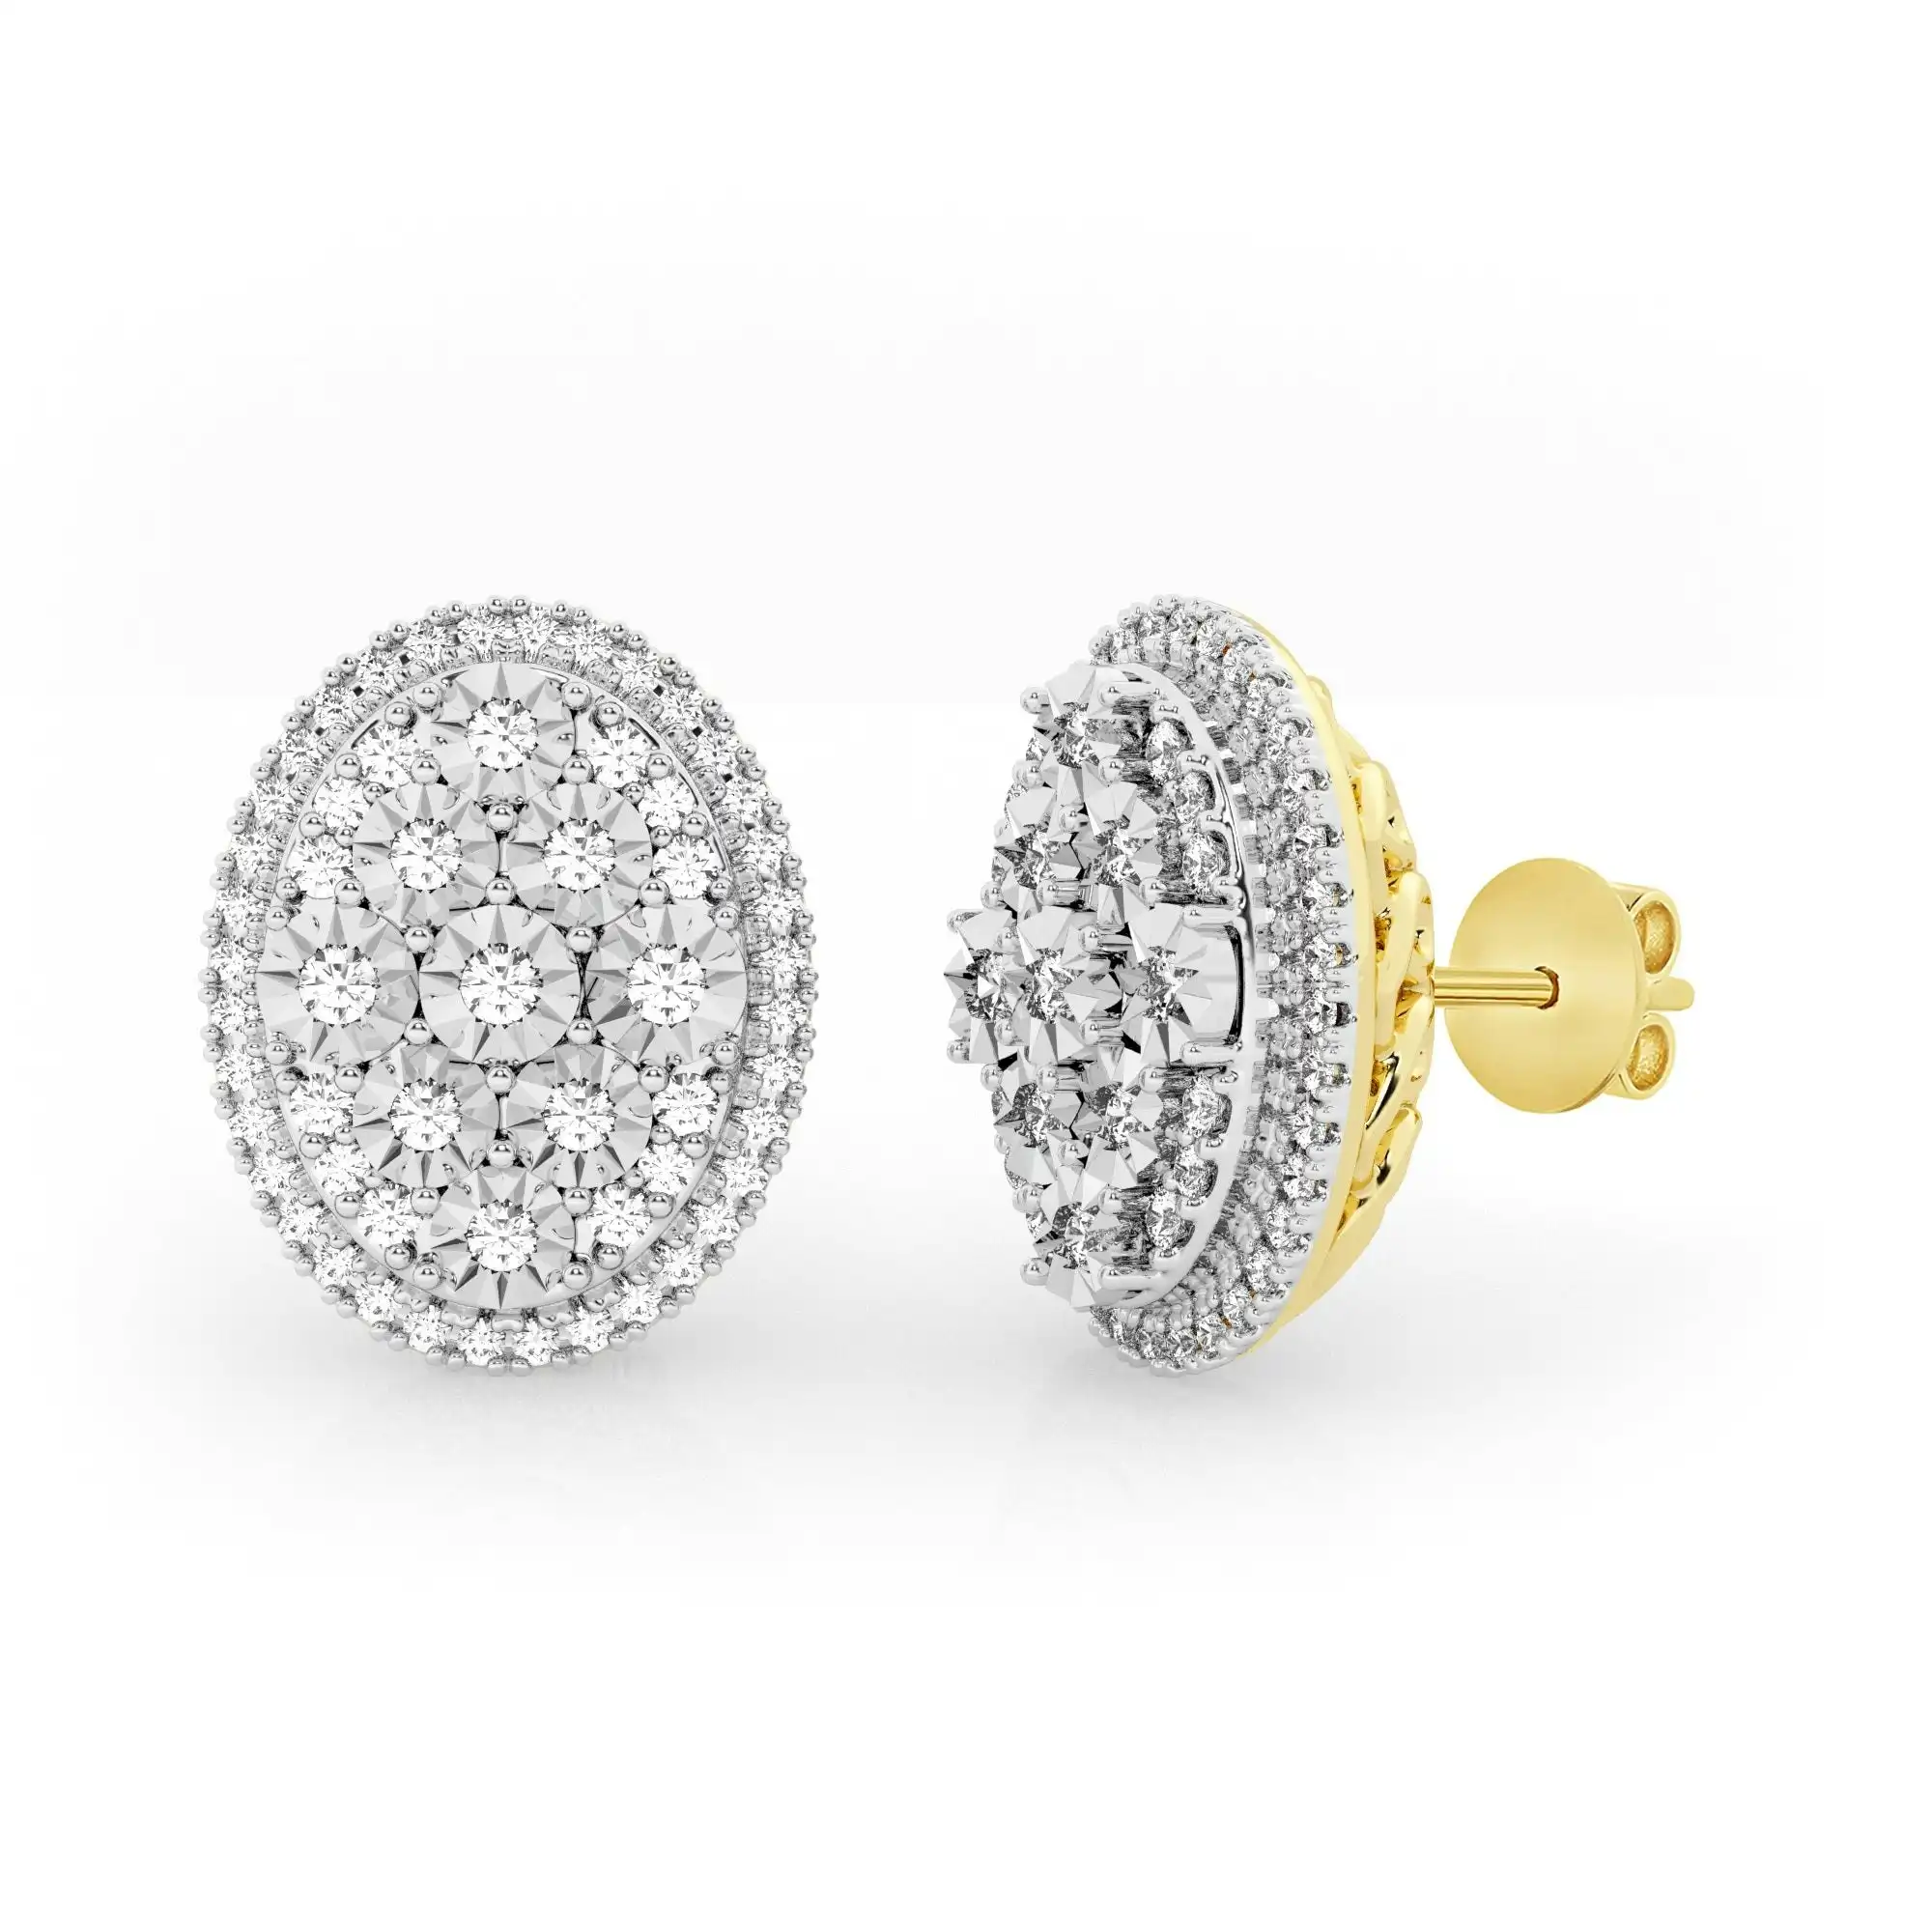 Fancy Oval Shape Earrings with 1/2ct of Diamonds in 9ct Yellow Gold